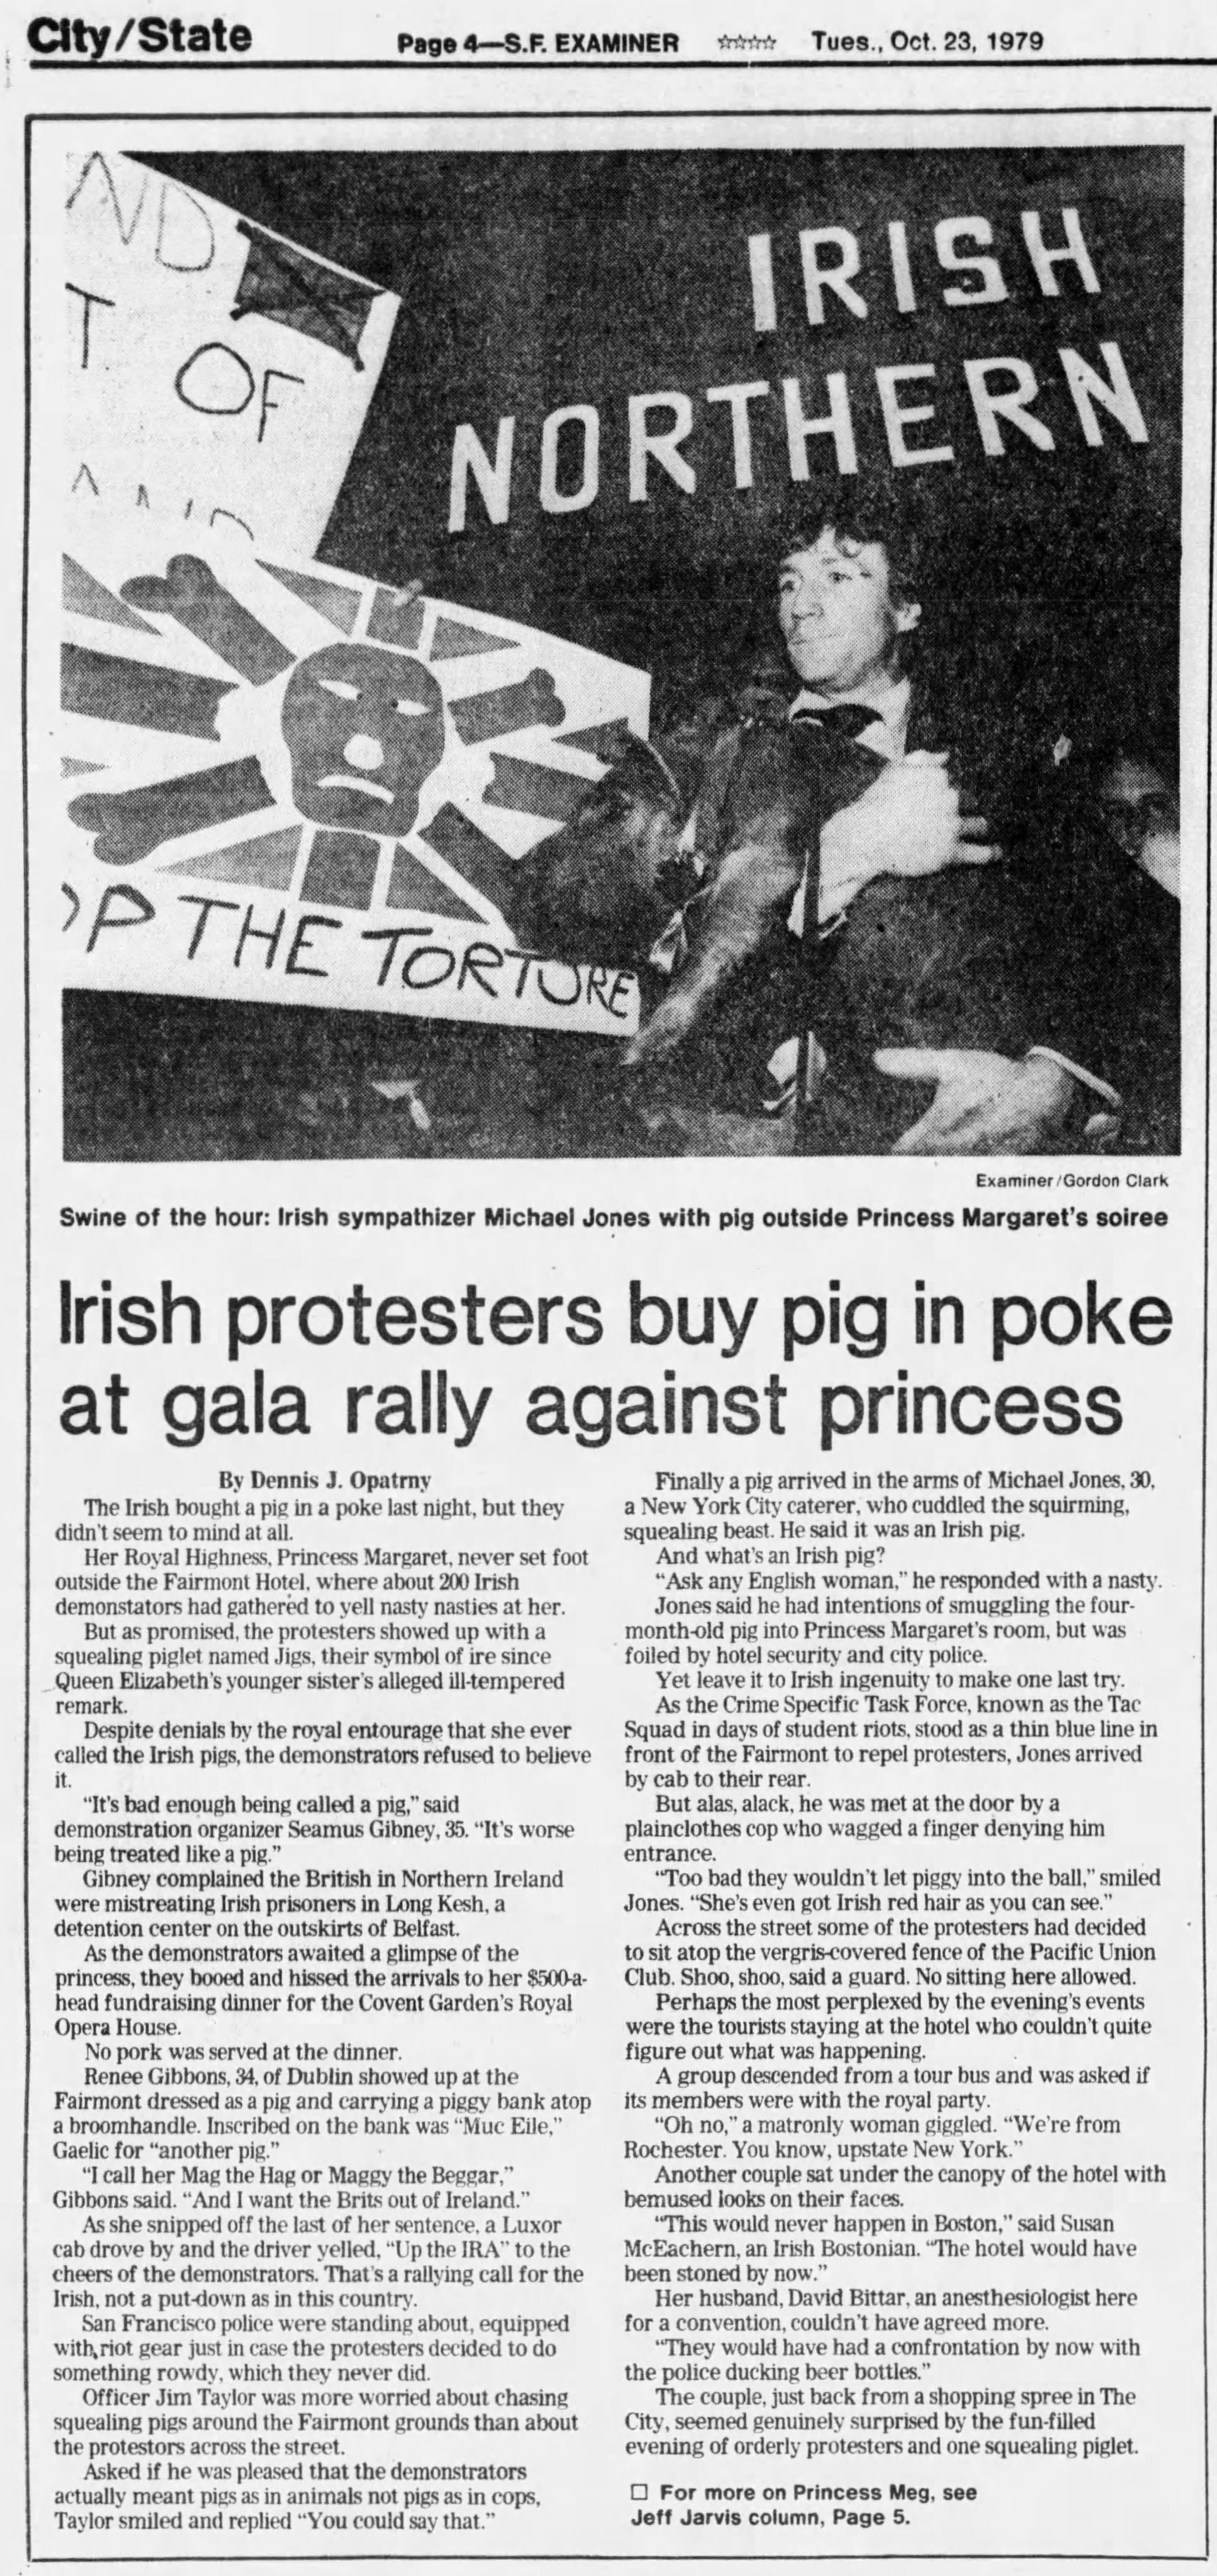 Newspaper article with a photo, dated October 23, 1979, showing a man, Michael Jones, holding a squirming pig at a protest outside a gala event.